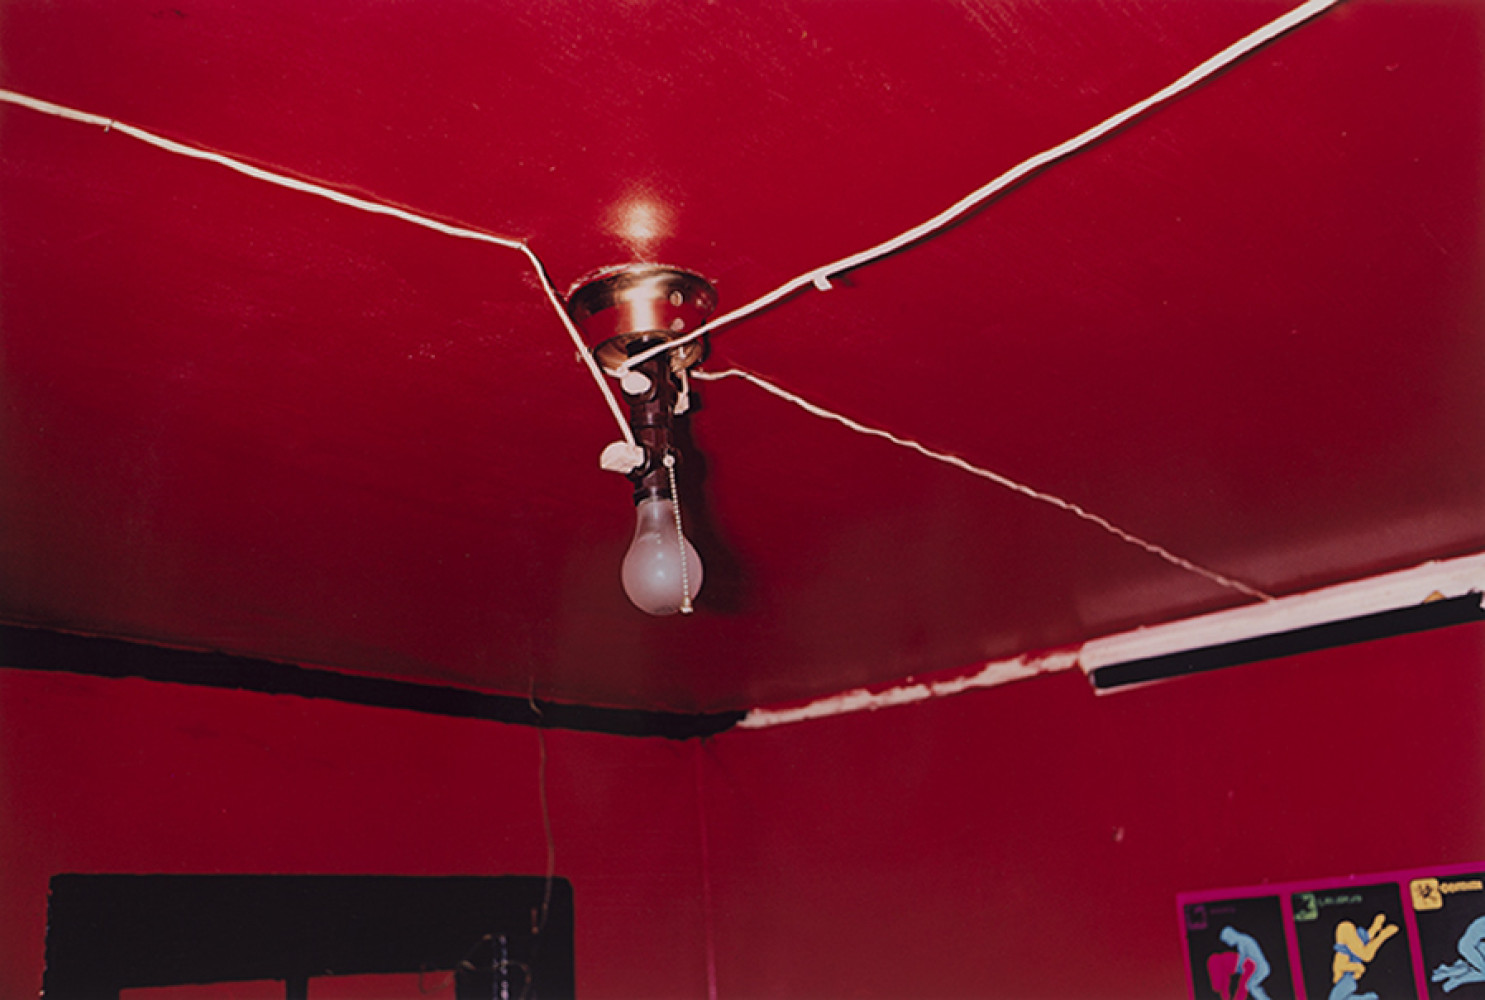 Untitled (Red Ceiling, Greenwood, Mississippi), 1971. Dye transfer print, ca. 1973, 12 5/8 x 18 7/8 inches. © Eggleston Artistic Trust, courtesy of David Zwiner New York.
